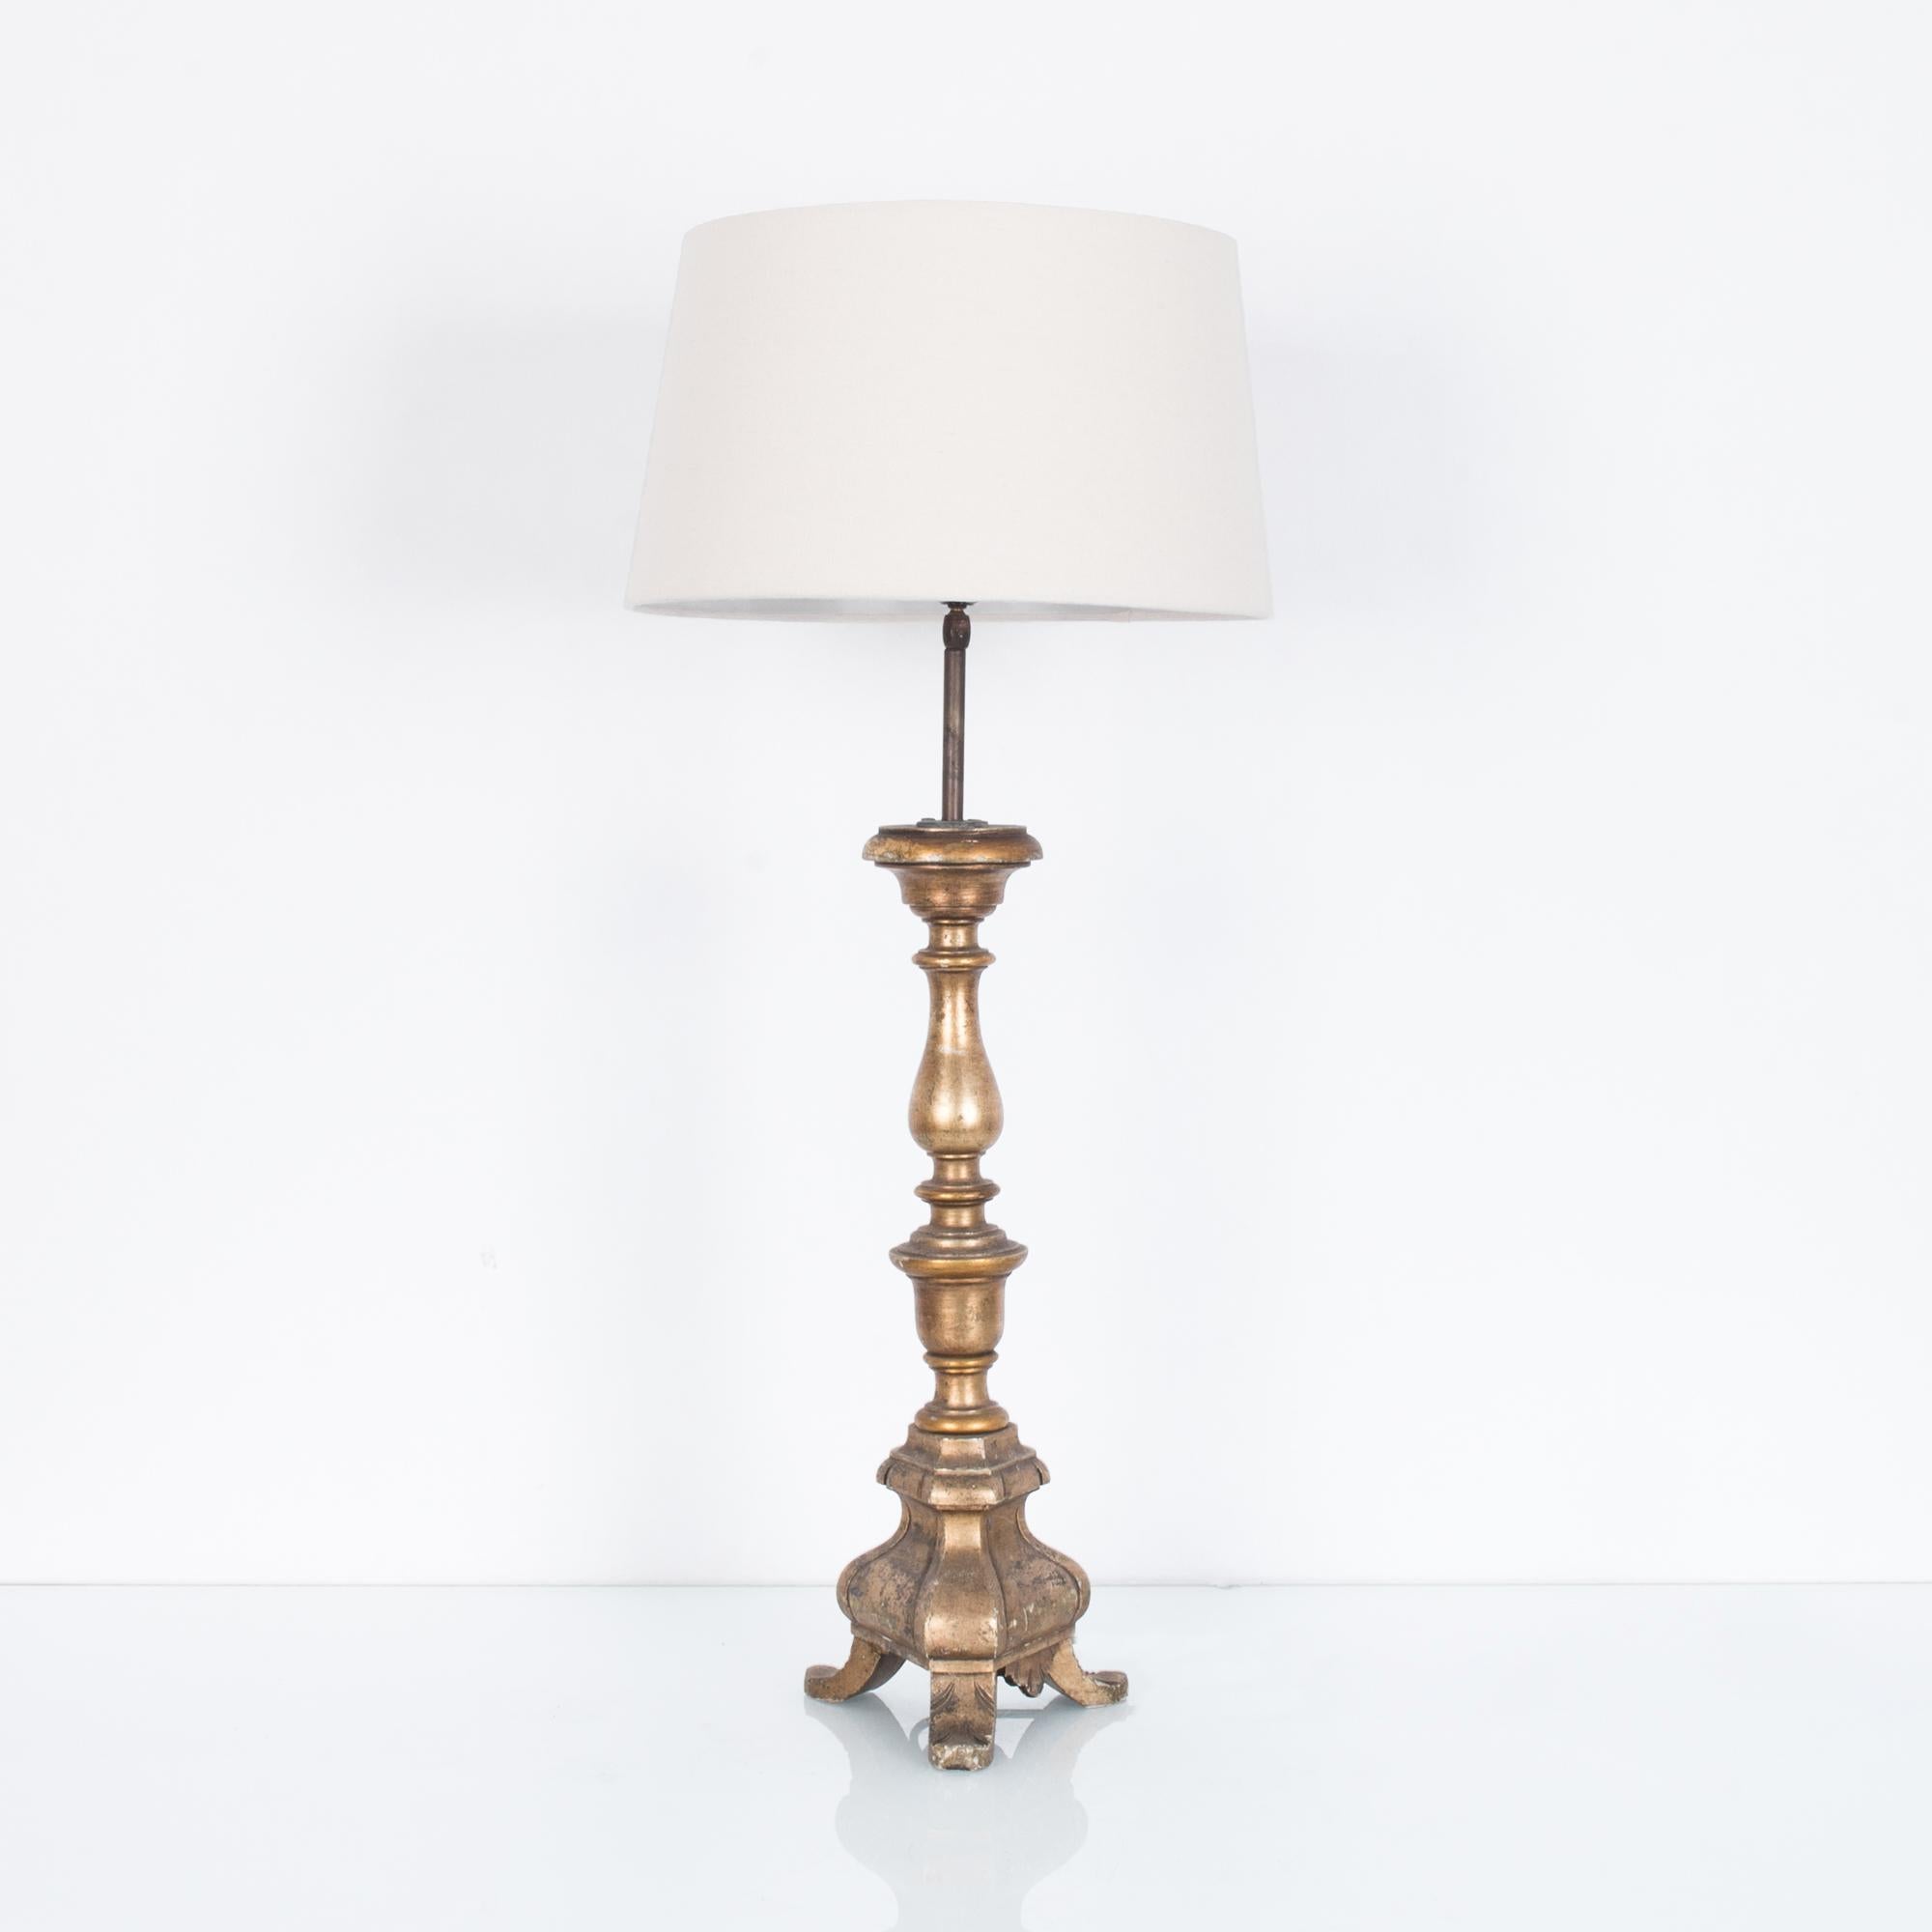 A gilded wooden table lamp from France, circa 1800. A repurposed wooden candlestick supports an empire lampshade in natural white. The shape is slender and elaborate, elevated by three curved feet. The gilded finish has aged into a warm, brassy